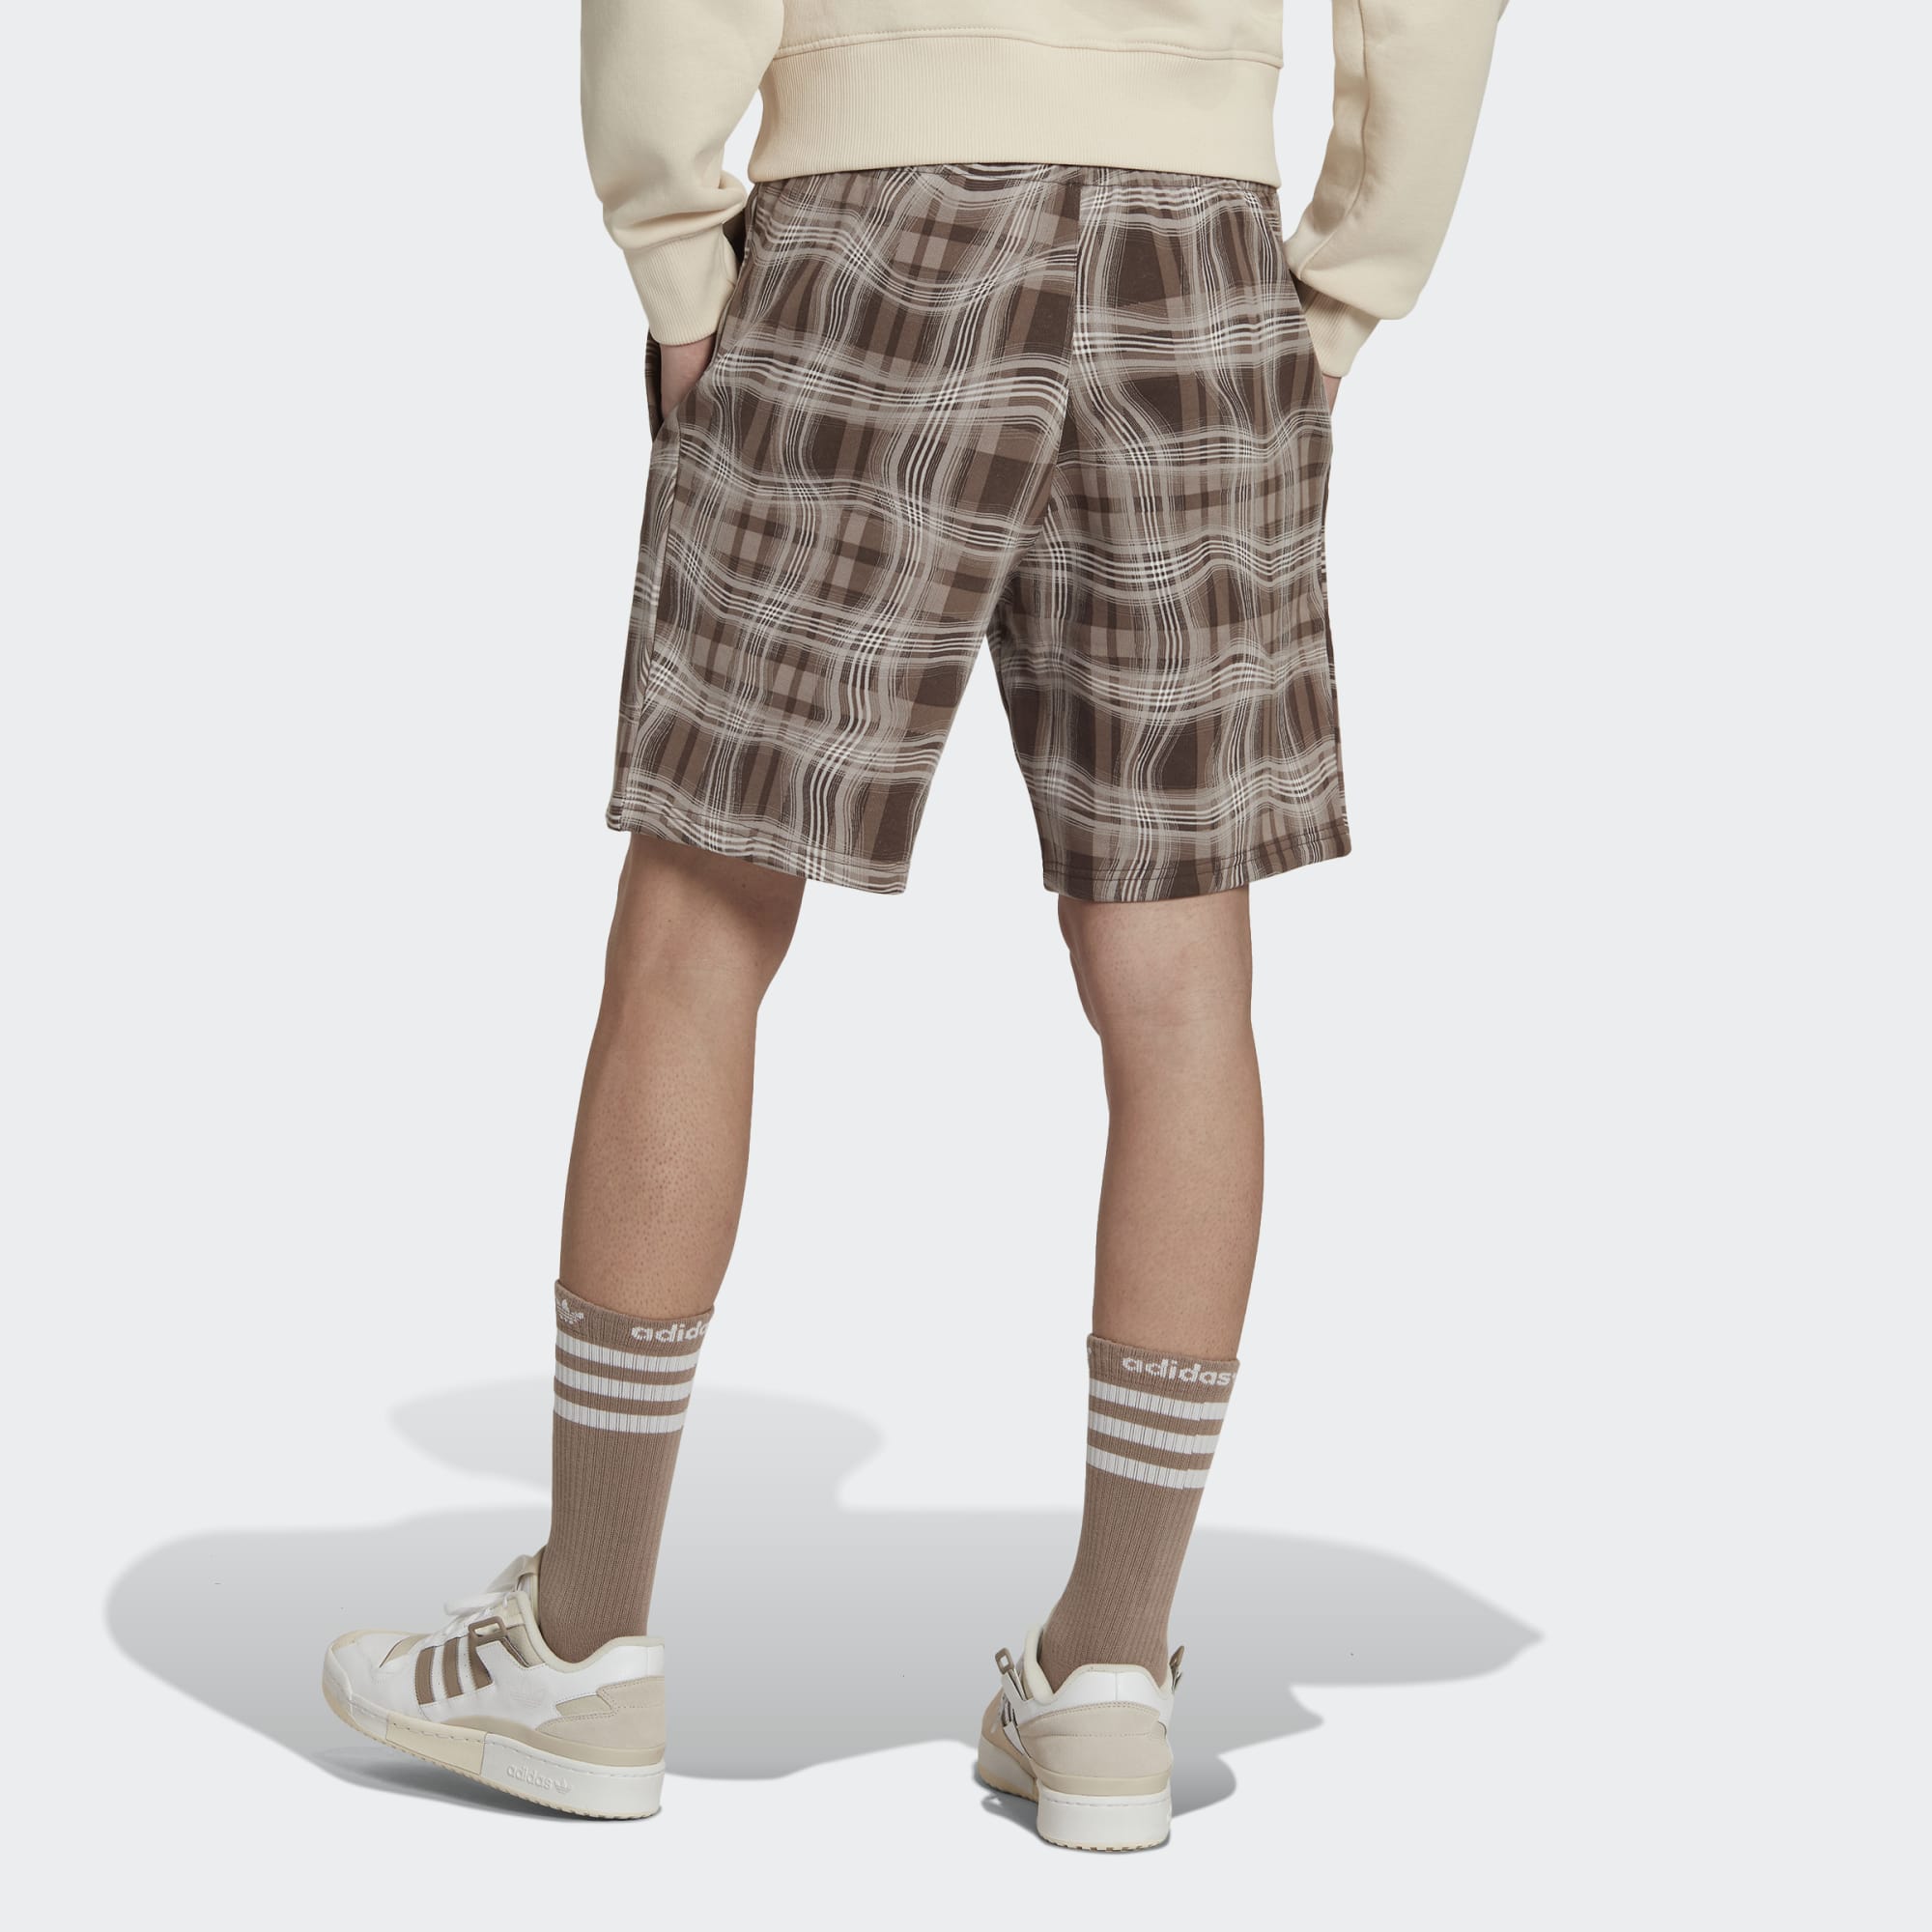 Reds Adidas - Puffer Chalky Brown Short AOP Plaid